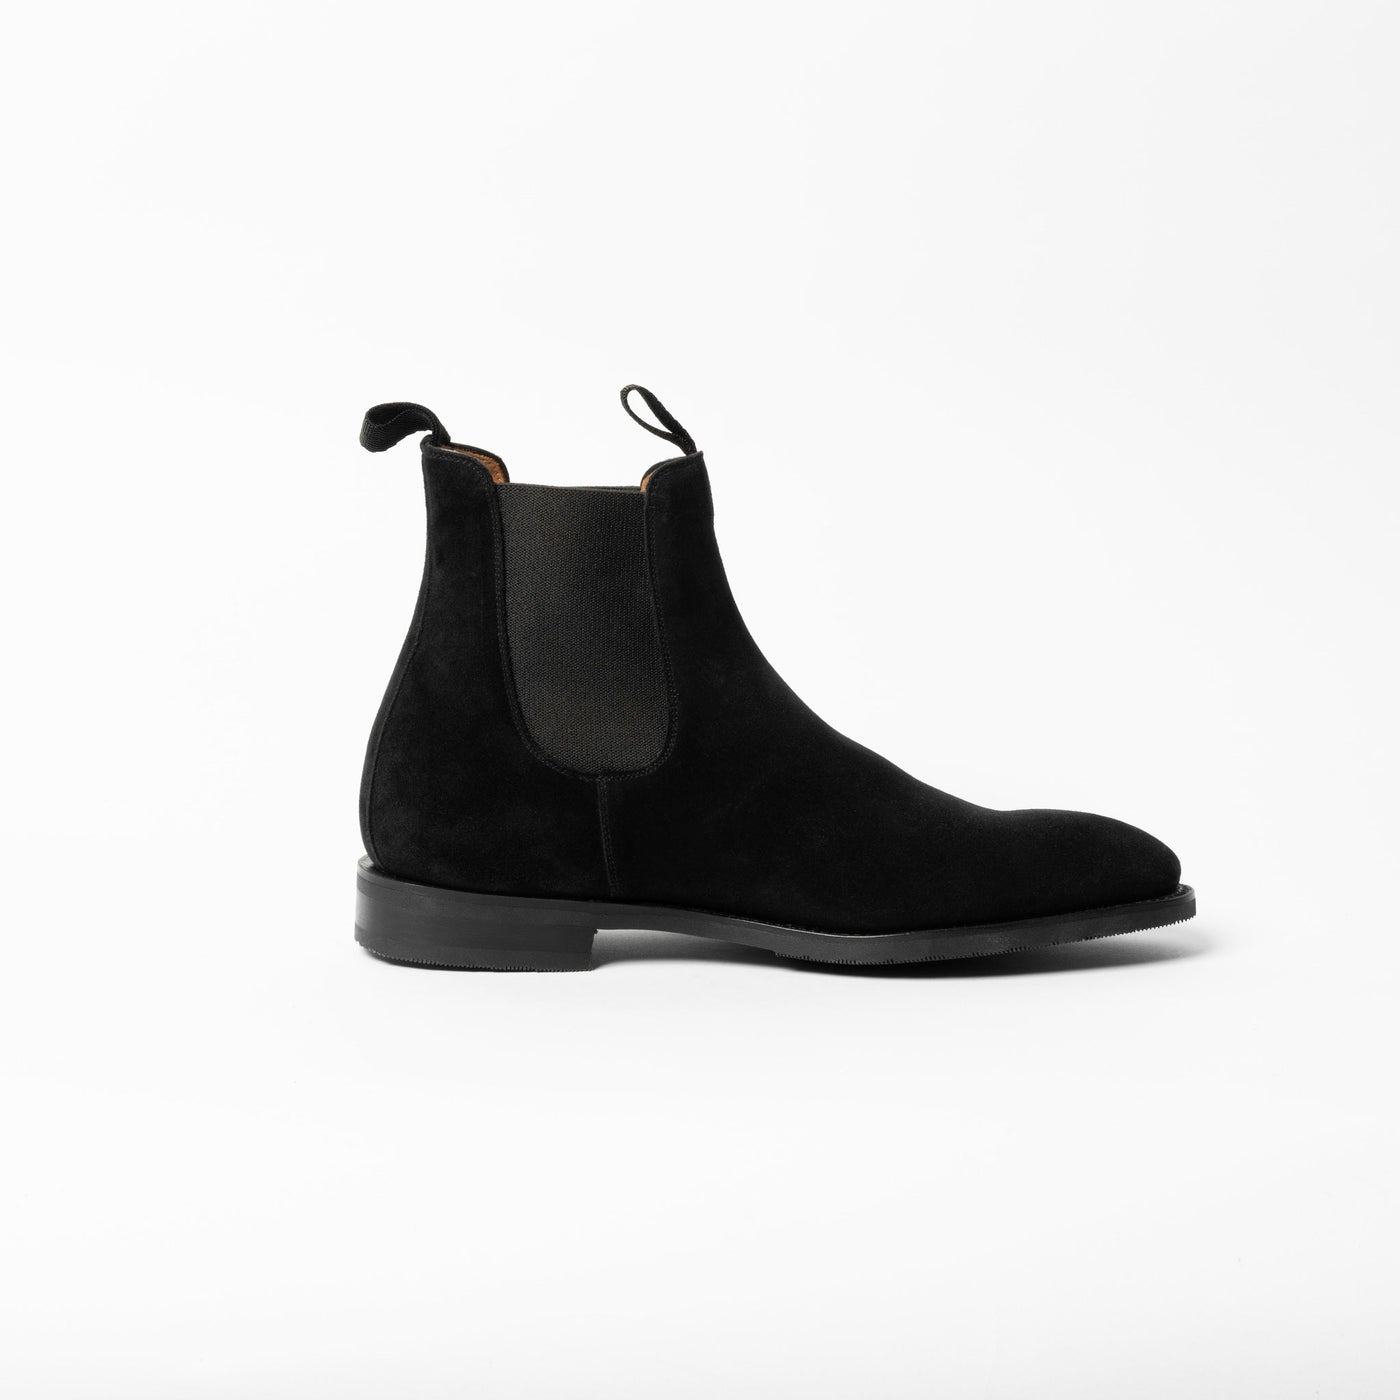 GOMMA CHELSEA BOOTS in BLACK SUEDE